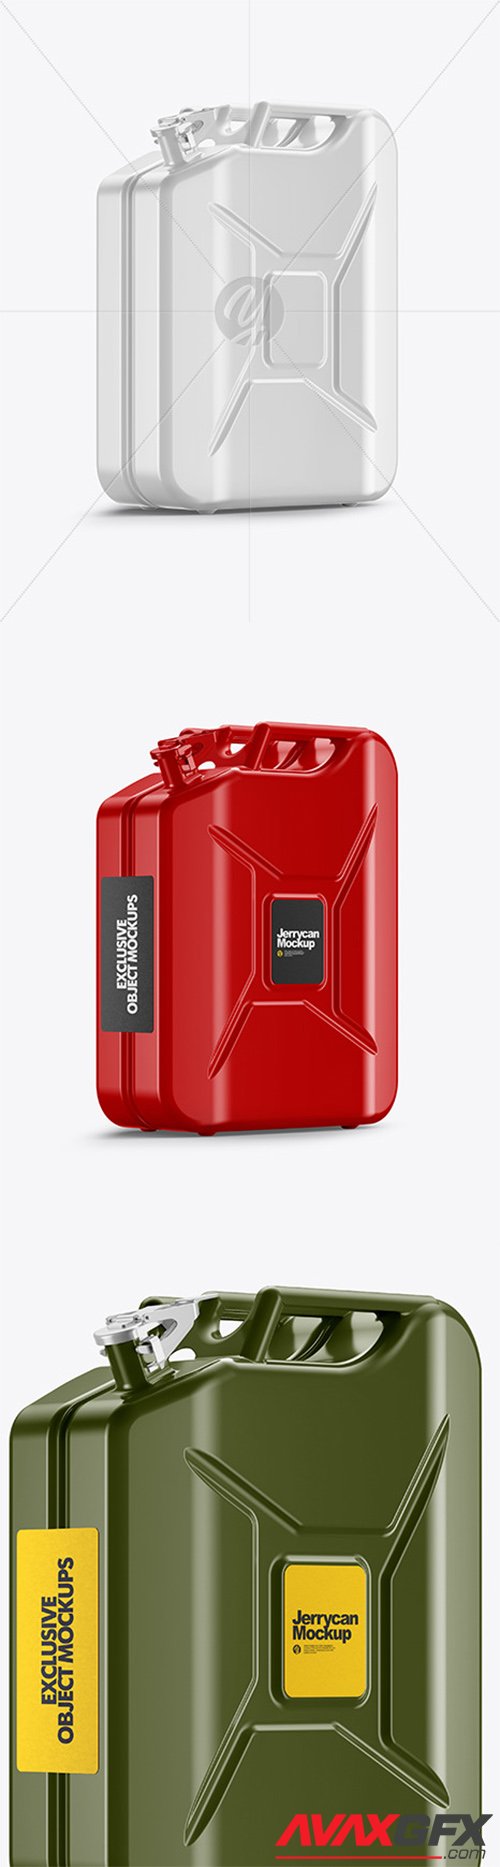 Fuel Jerrycan - Half Side View 79523